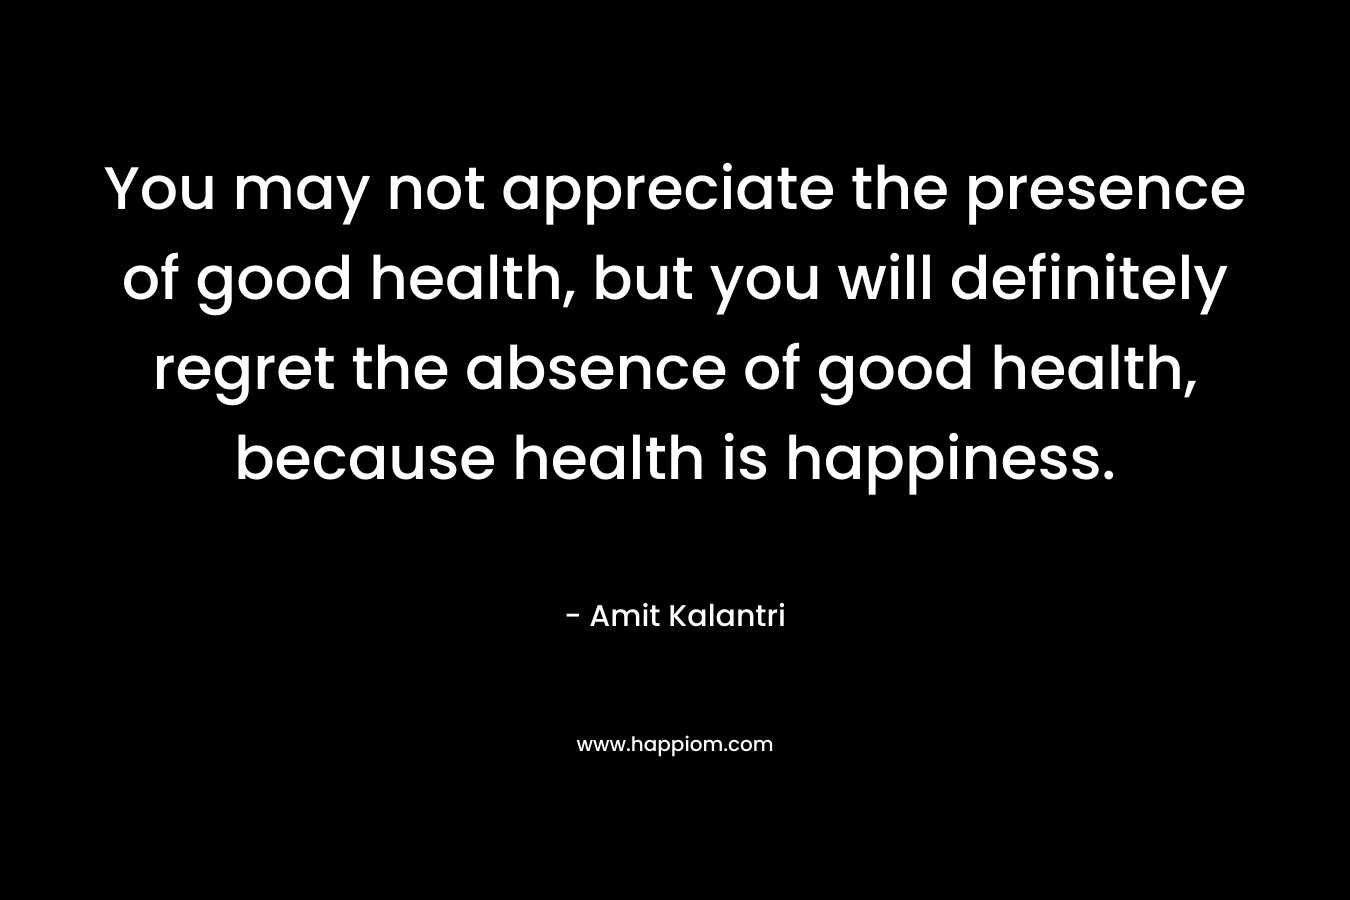 You may not appreciate the presence of good health, but you will definitely regret the absence of good health, because health is happiness.